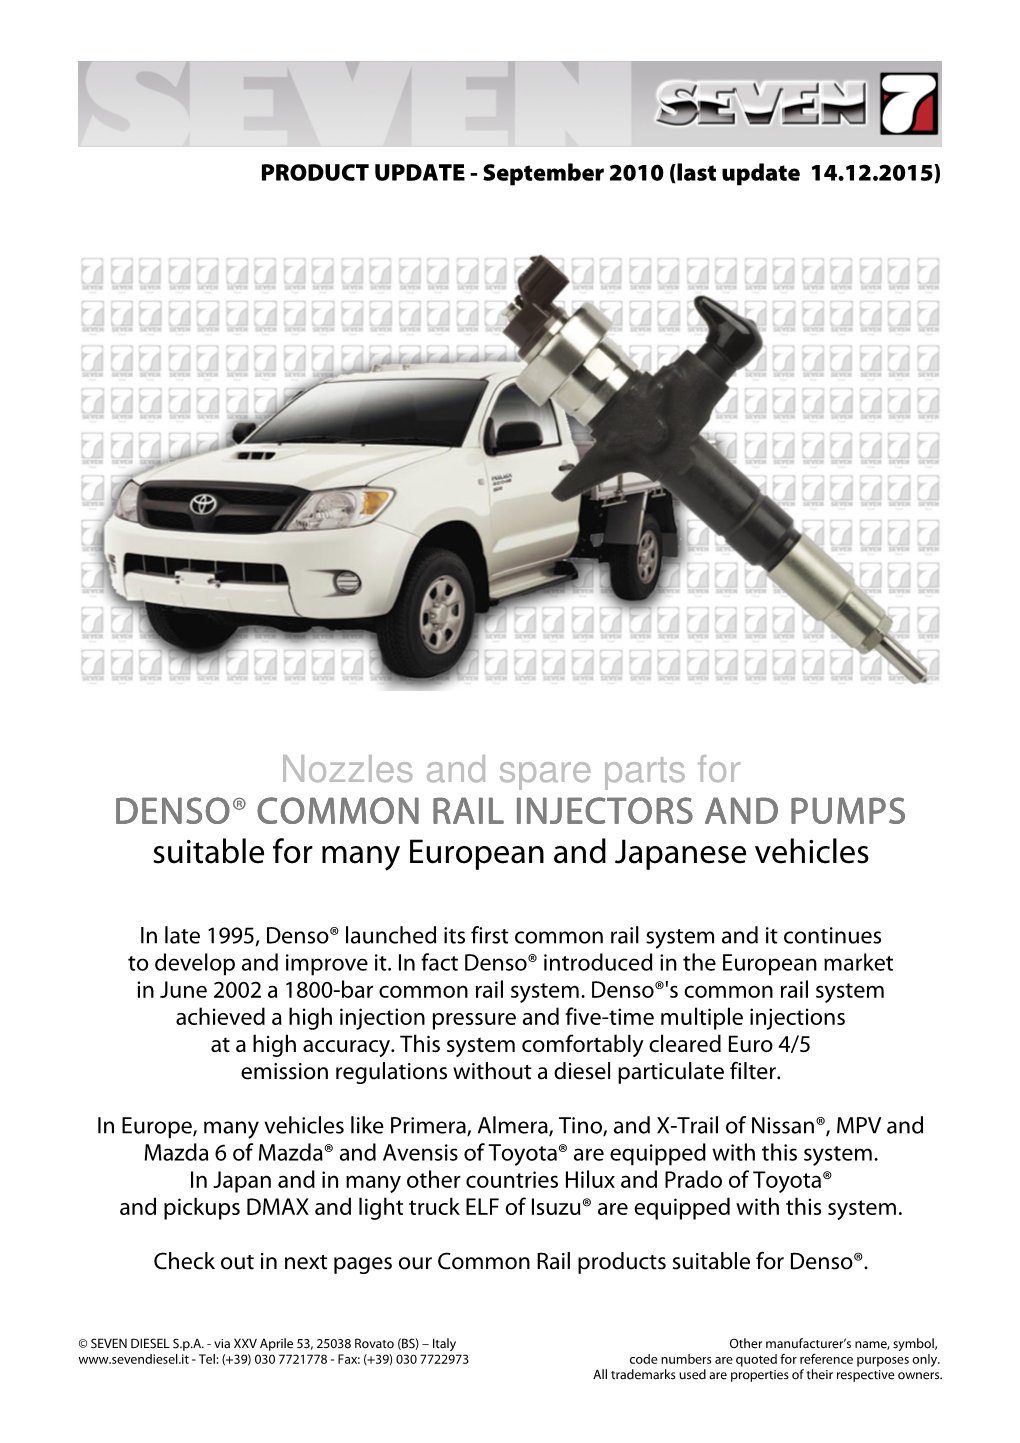 Nozzles and Spare Parts for DENSO® COMMON RAIL INJECTORS AND